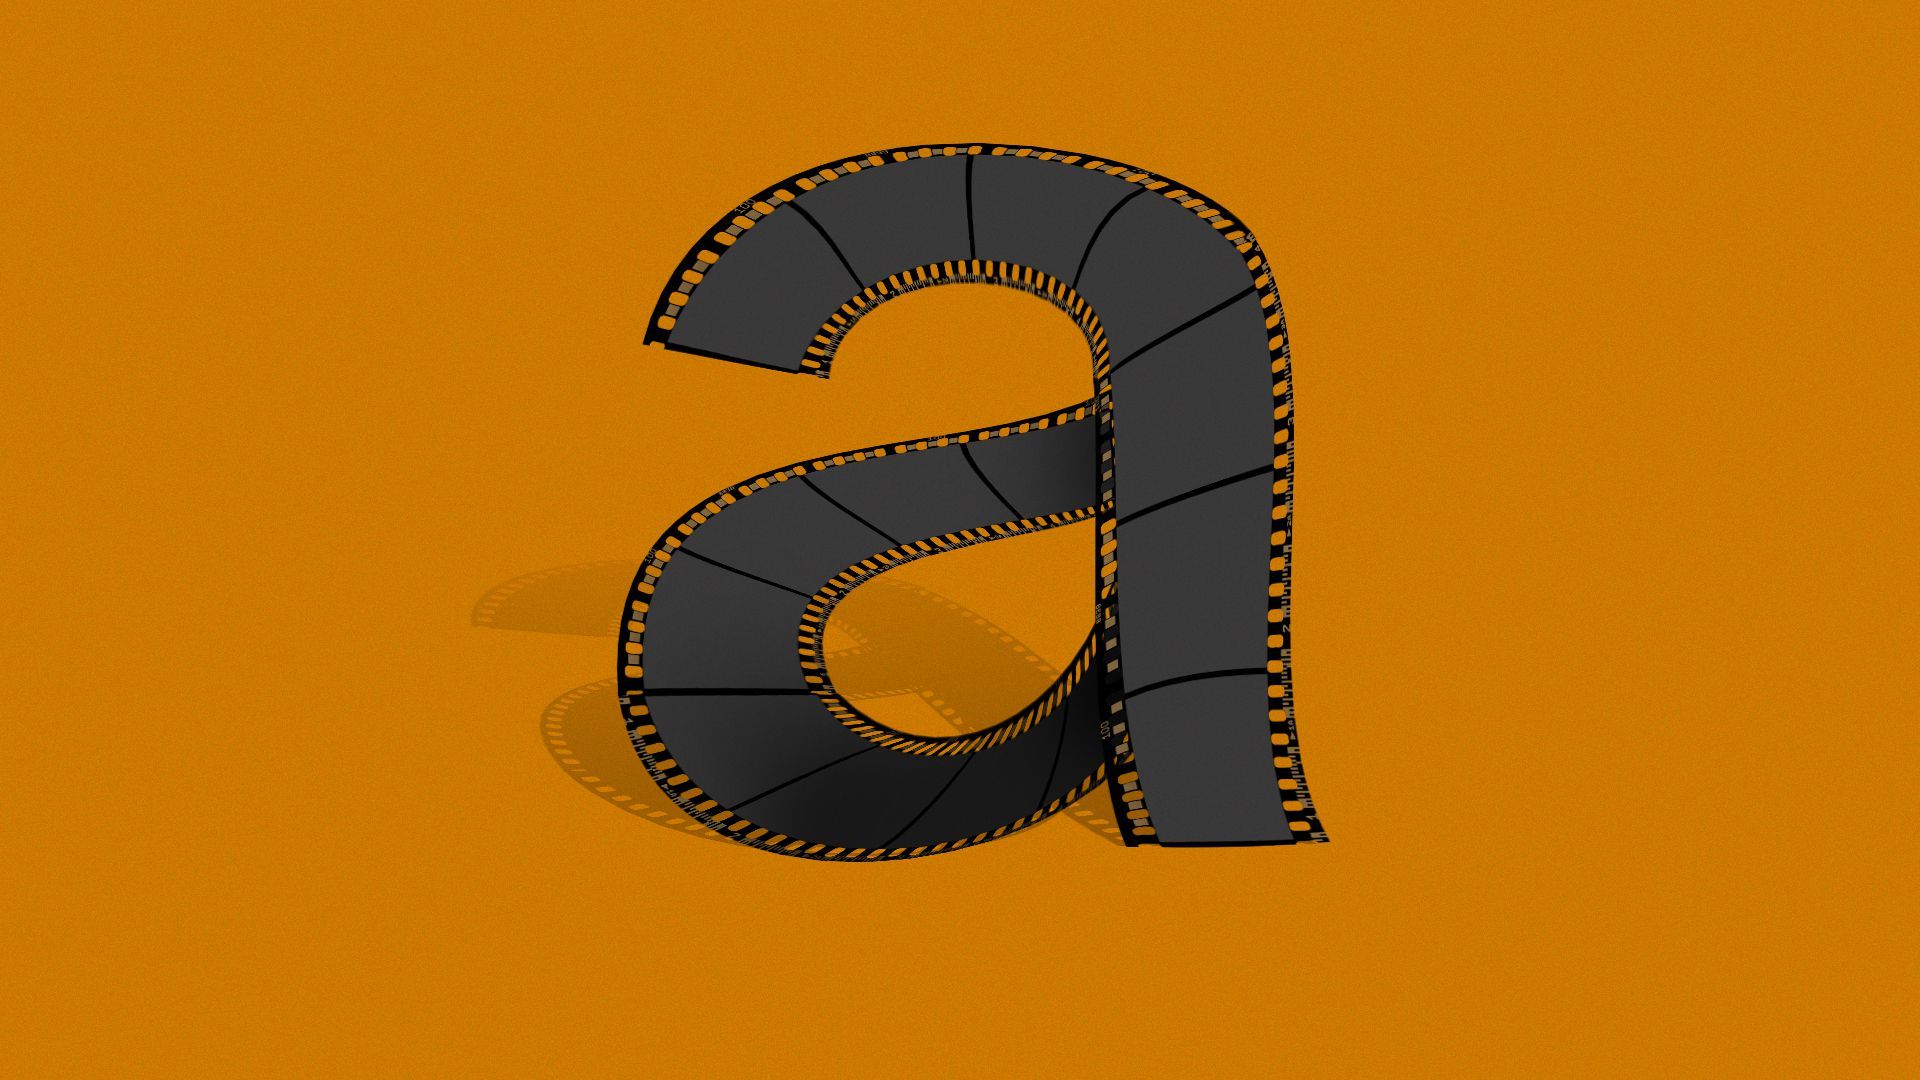 Illustration of Amazon "A" made from film negatives.